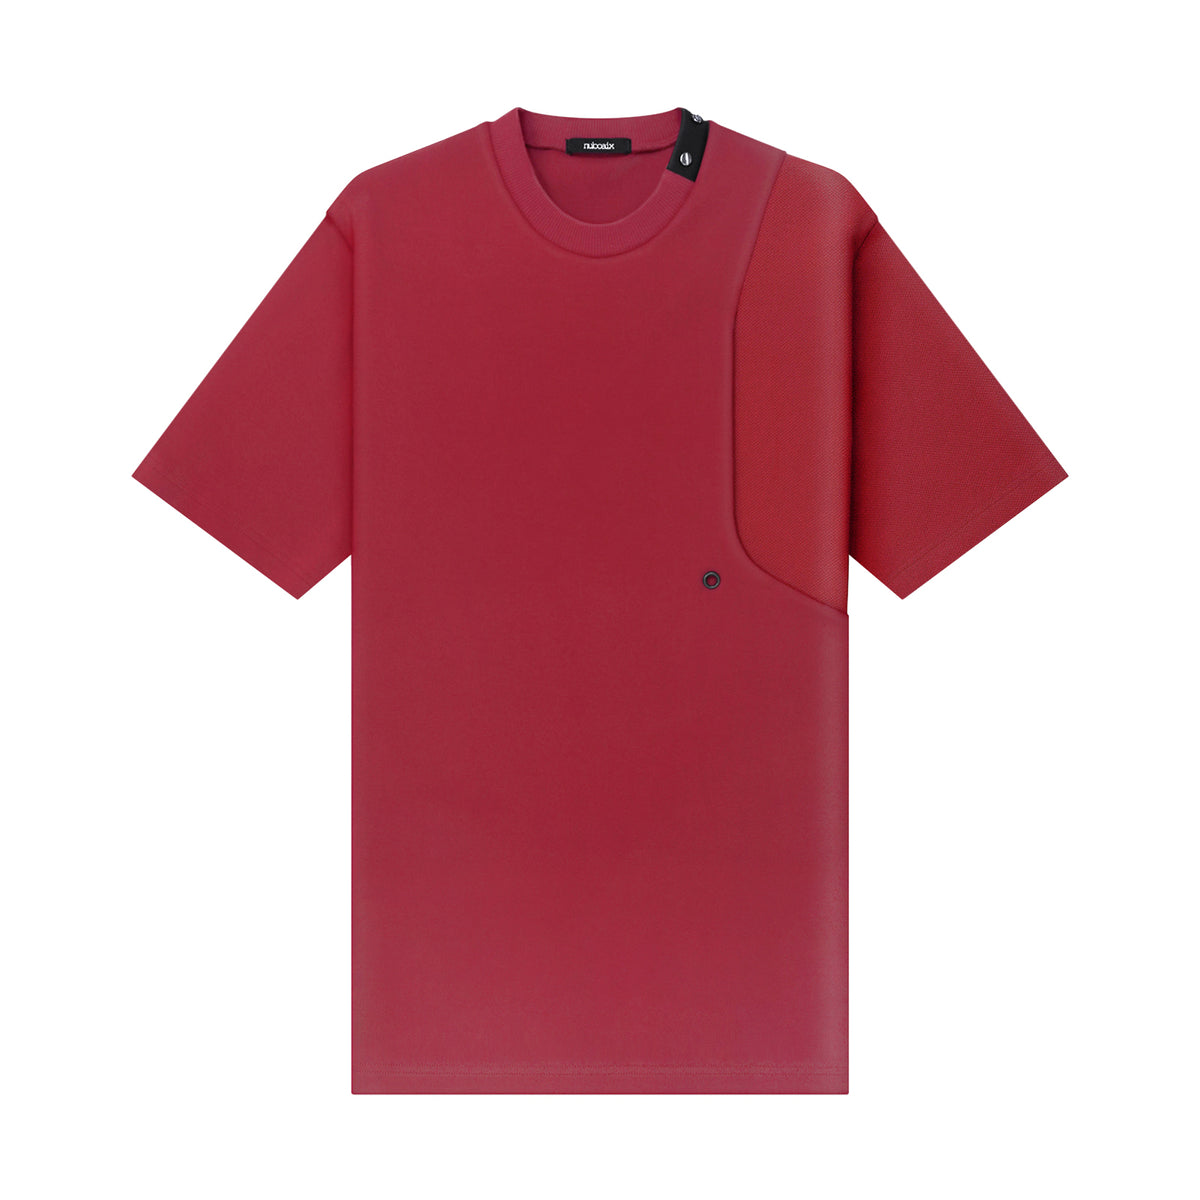 Mixed Material Pocket Tee [Red]